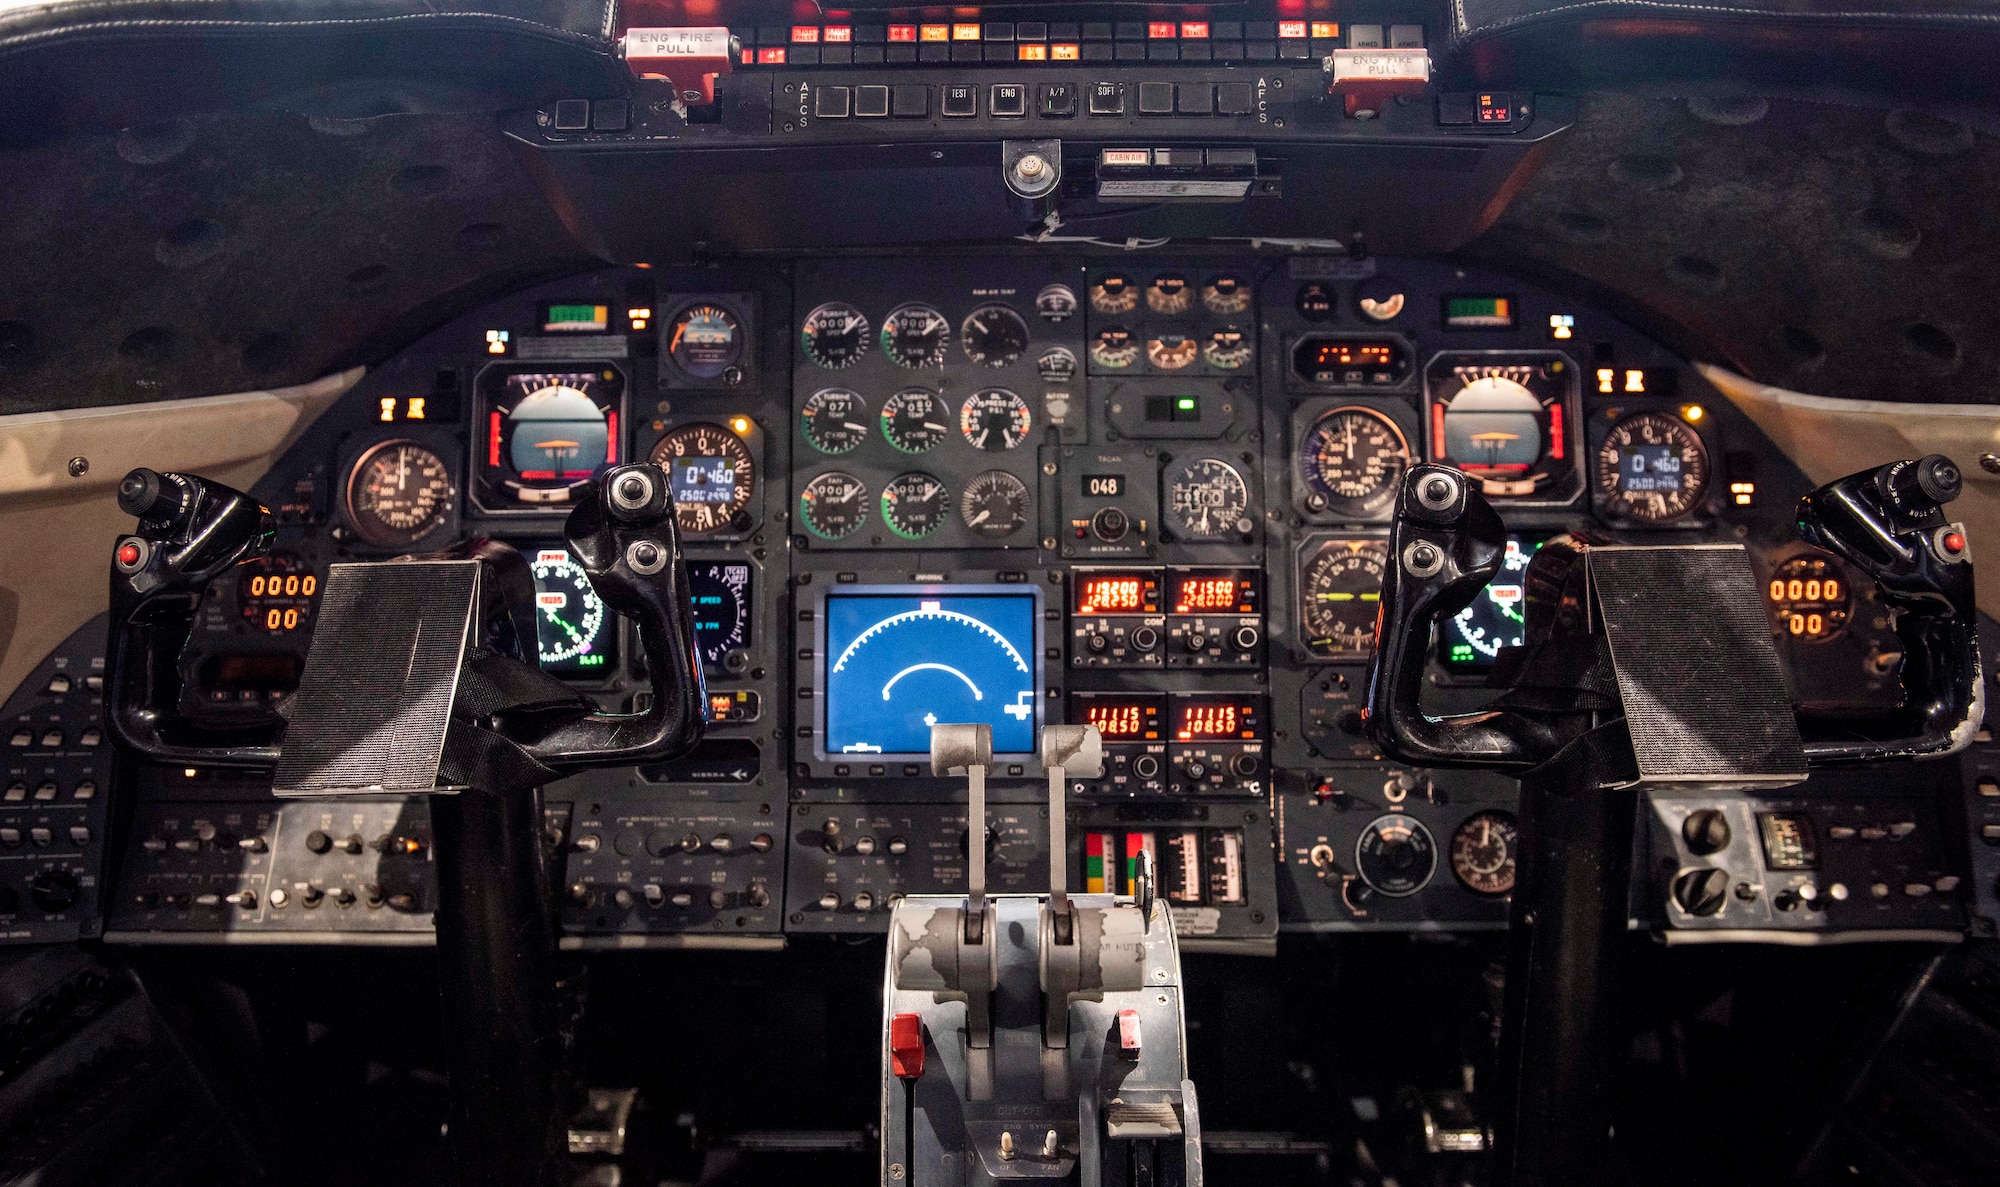 A view of the legacy cockpit of the C-21 aircraft, which is undergoing a $38 million avionics upgrade. (U.S. Air Force photo by Senior Airman Daniel Garcia)